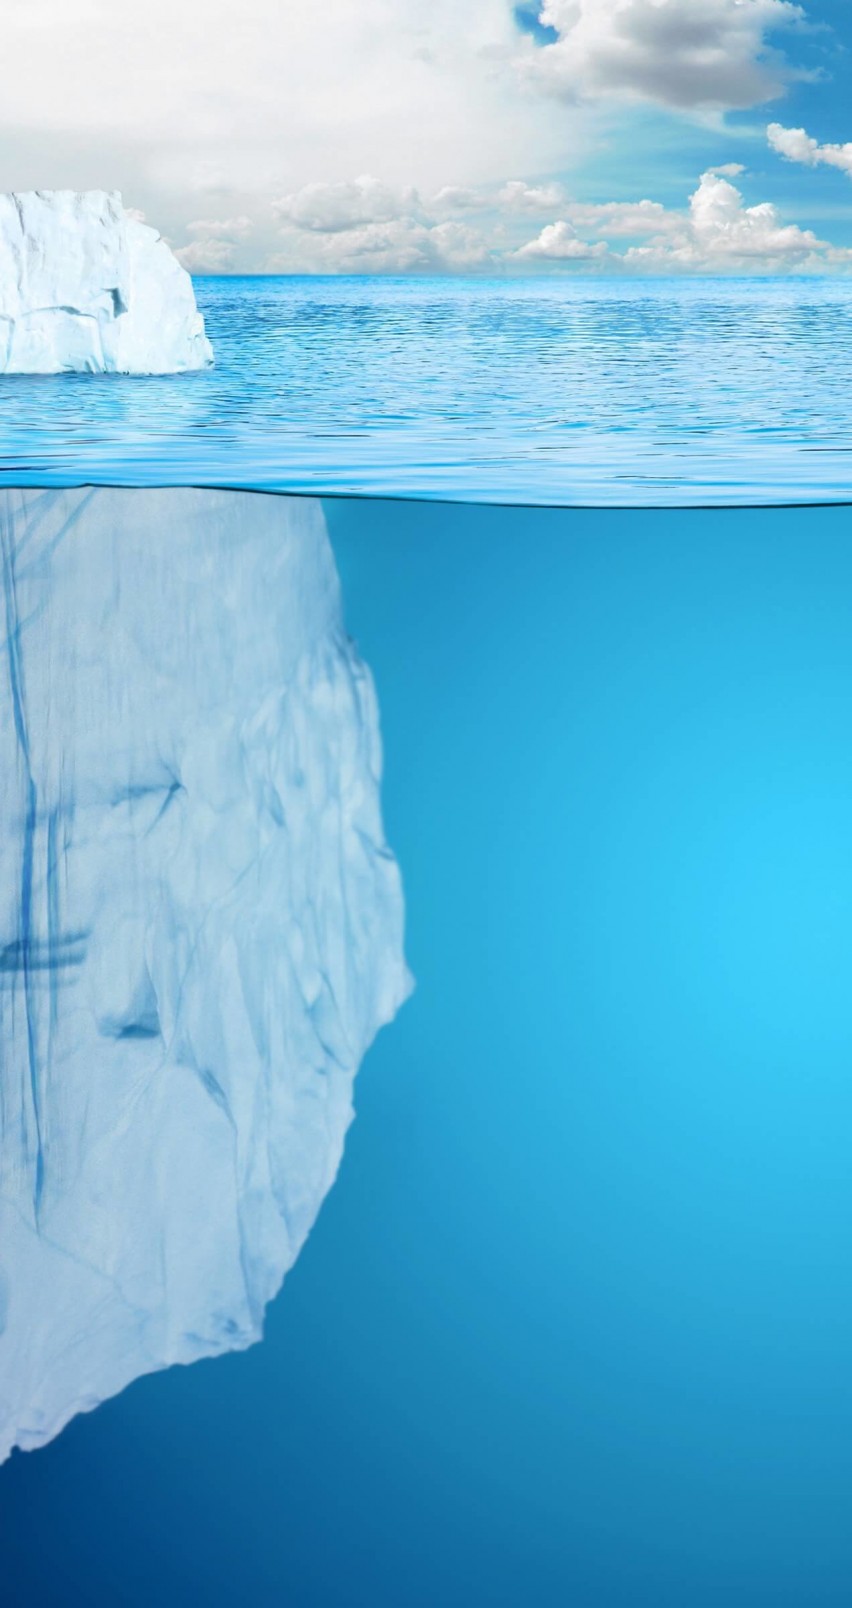 The invisible part of the iceberg Wallpaper for Apple iPhone 6 / 6s